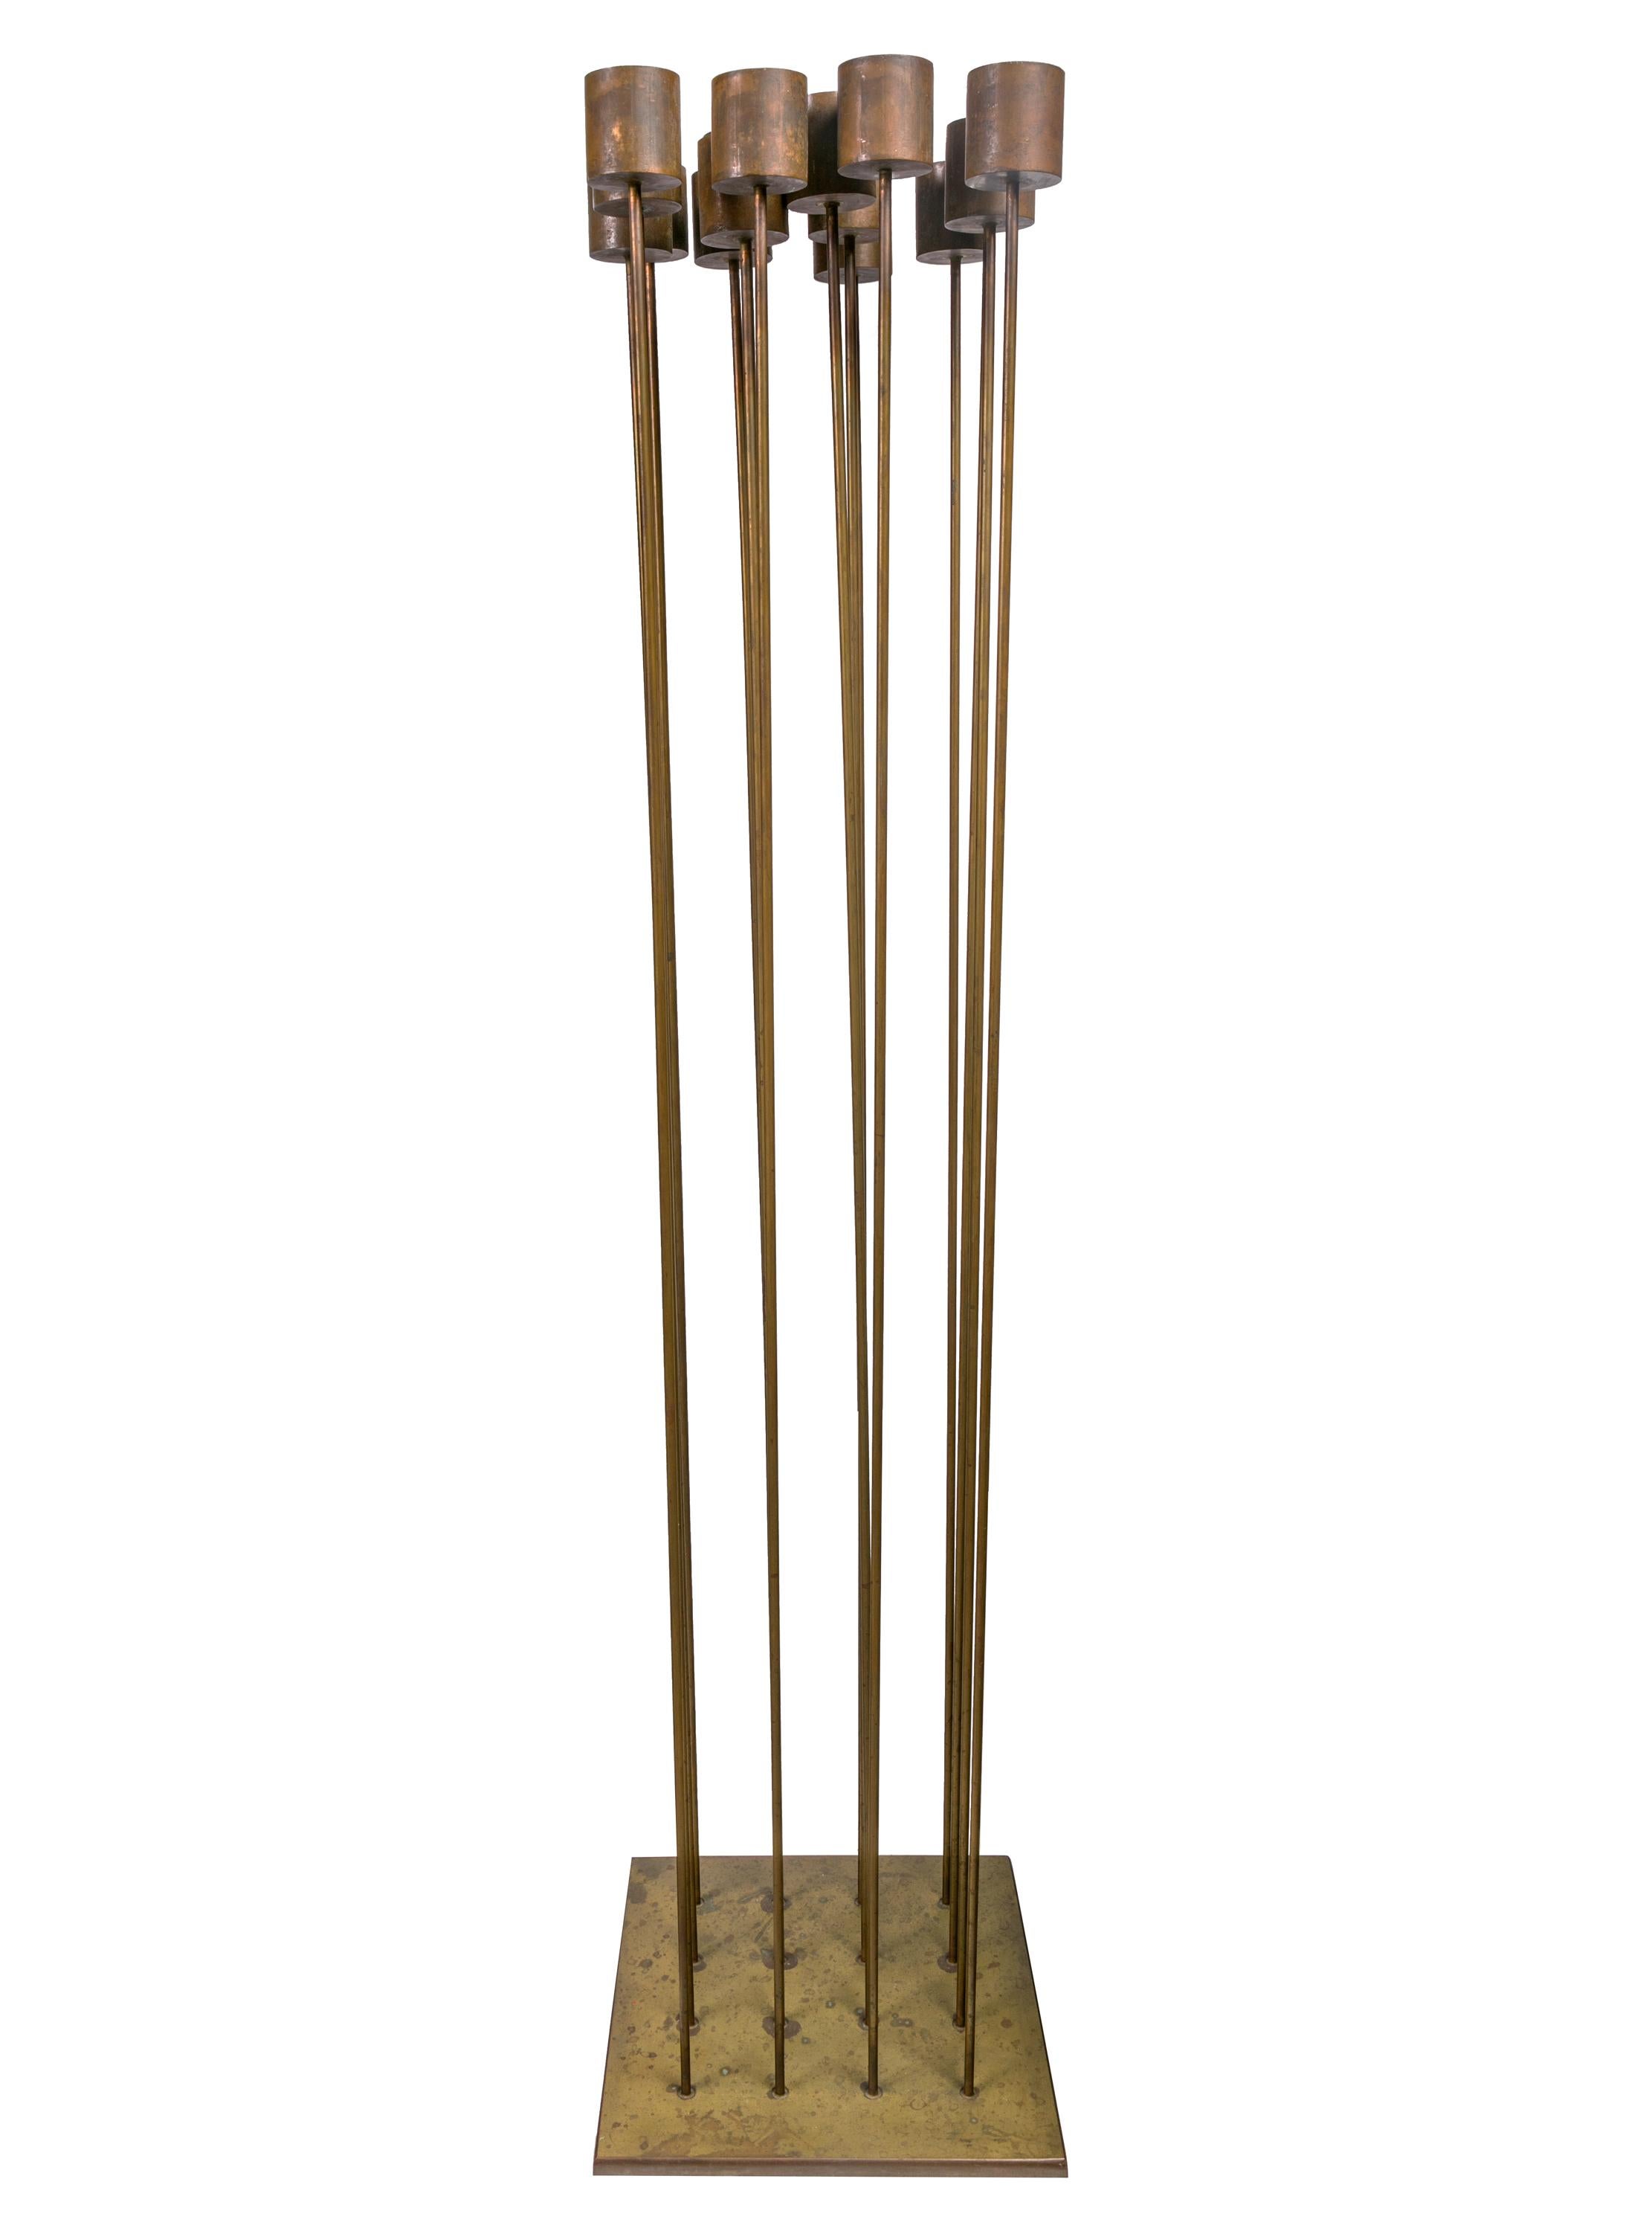 An outstanding example of Bertoia's highly sought after sonambient sculptures. This piece has both significant height and density of rods with the addition of the impressive knockers at the top of the rods. It is also made from beryllium copper